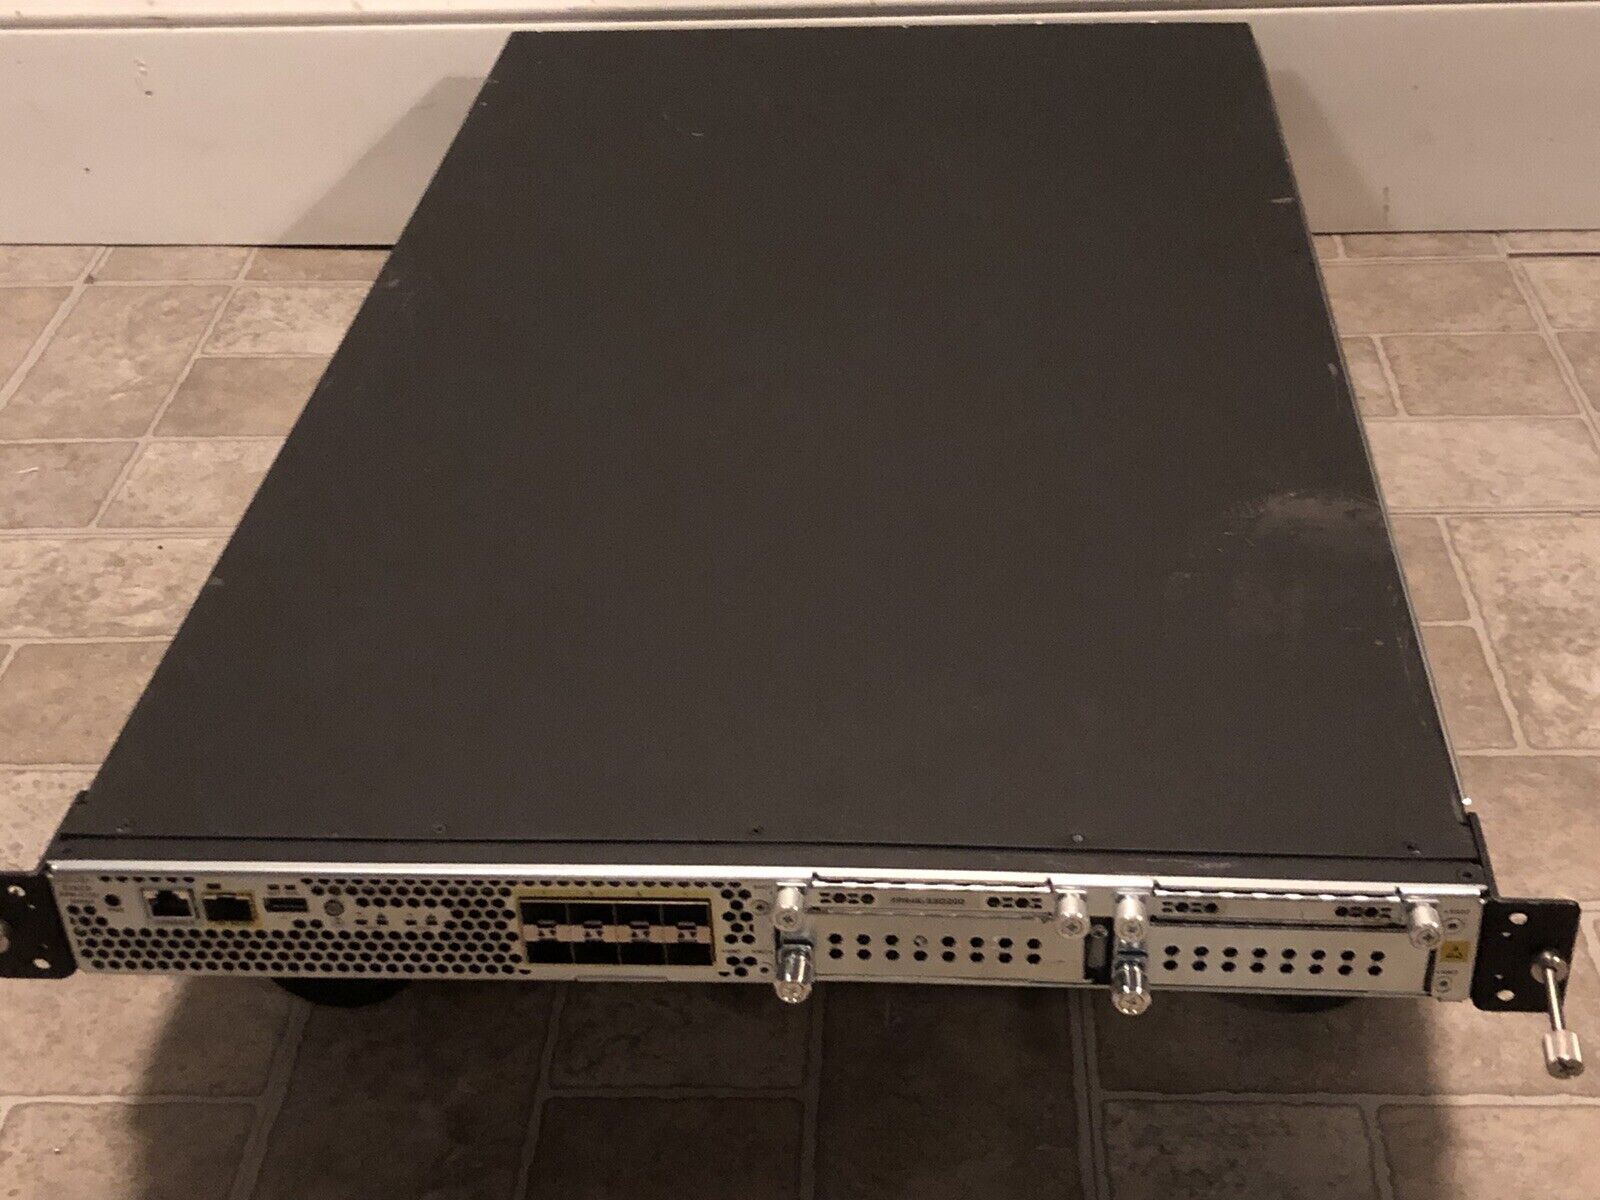 Cisco FPR-4110-K9 FirePower Security Appliance FPR4K +Hard Drive and Ram -Tested